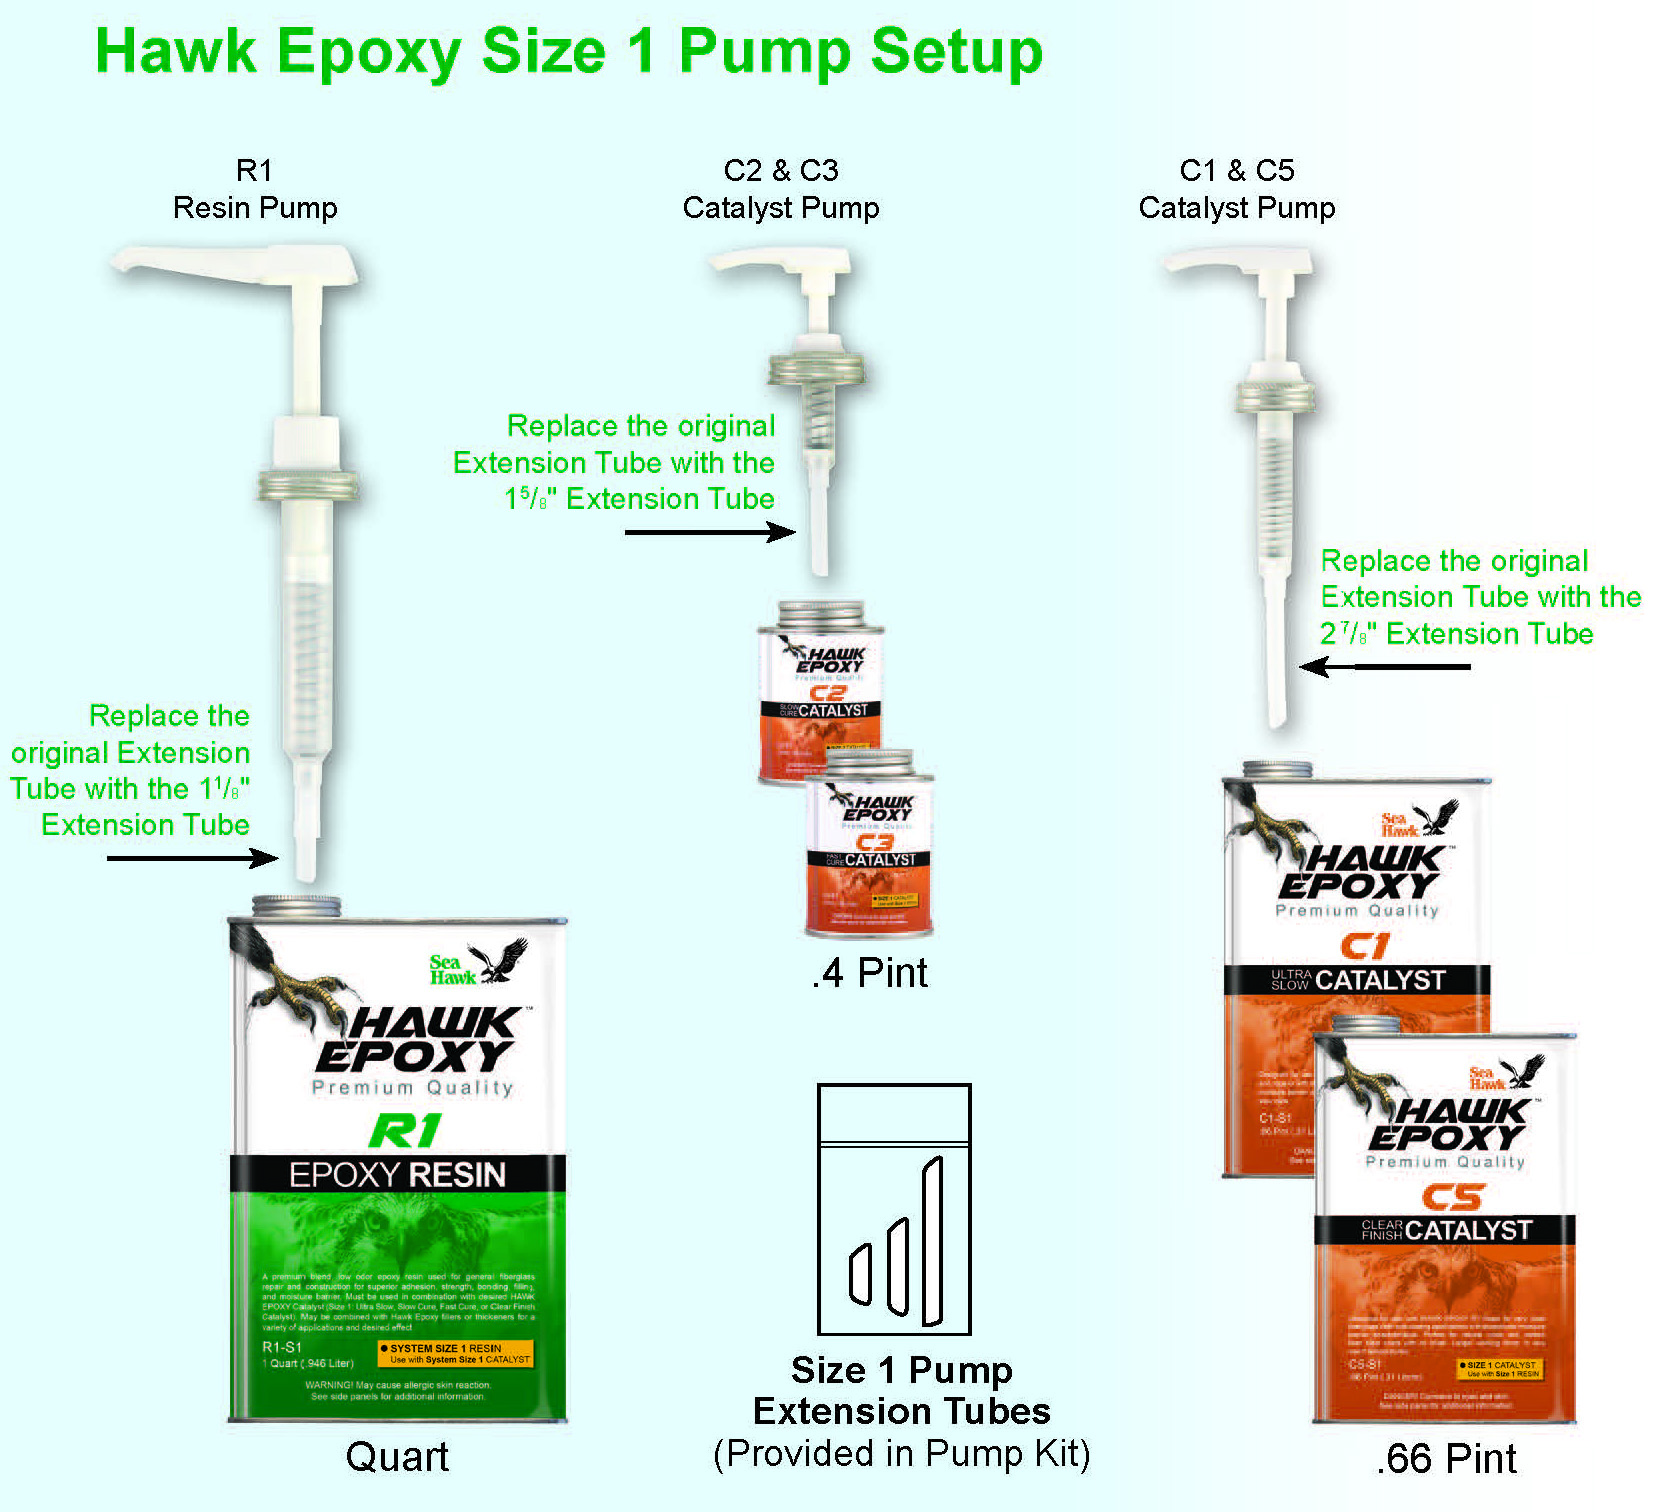 Converting Hawk Pumps to Size 1